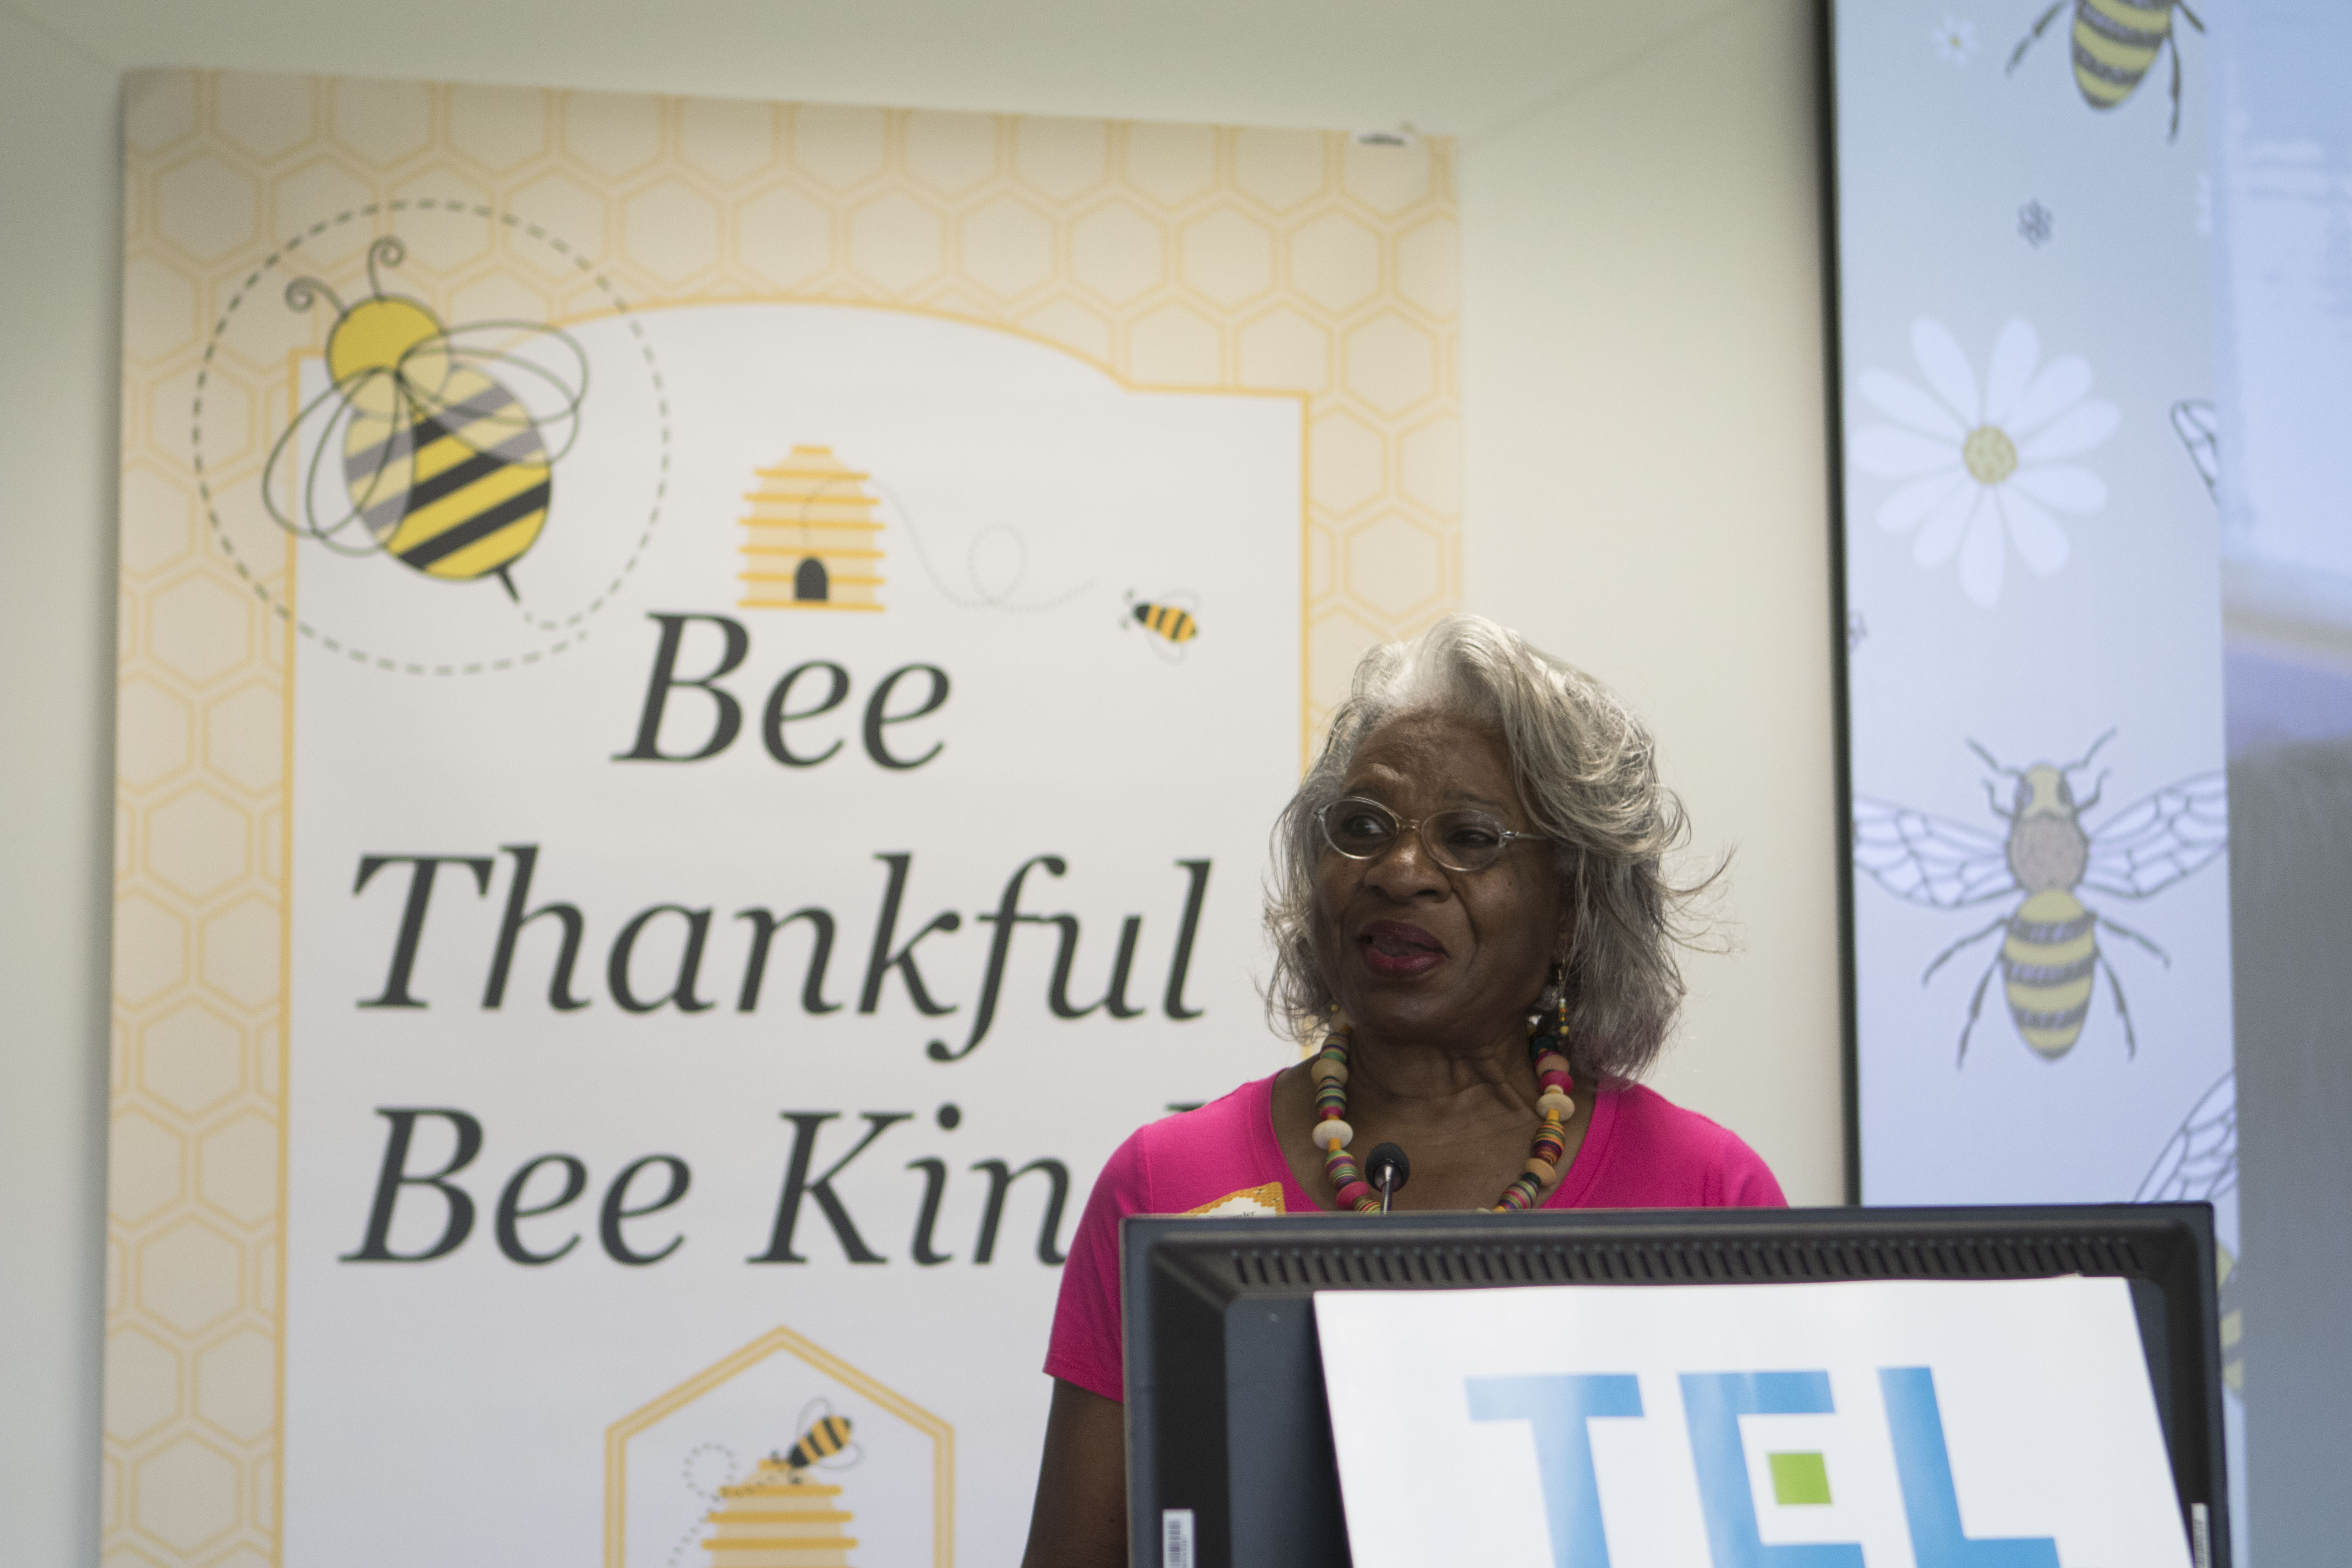 A female-identified person stands at a podium delivering a speech. A sign behind her reads "Bee Thankful Bee Kind"